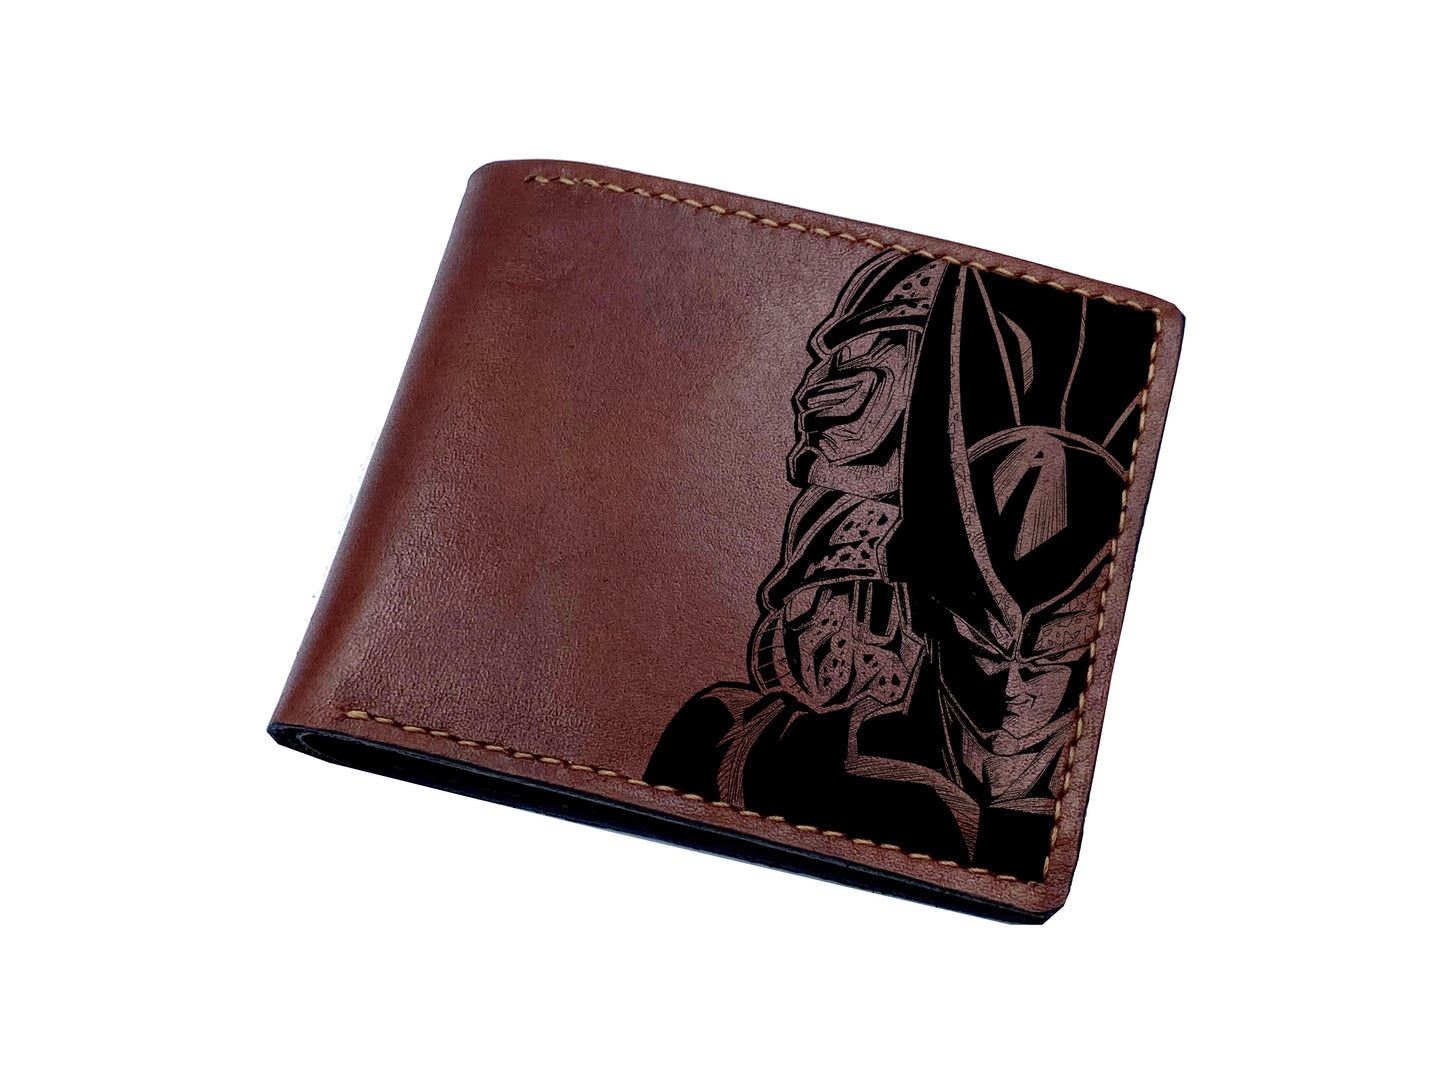 Mayan Corner - Personalized leather bifold wallet, Gohan super saiyan leather gift, anime leather present for boyfriend, husband, father